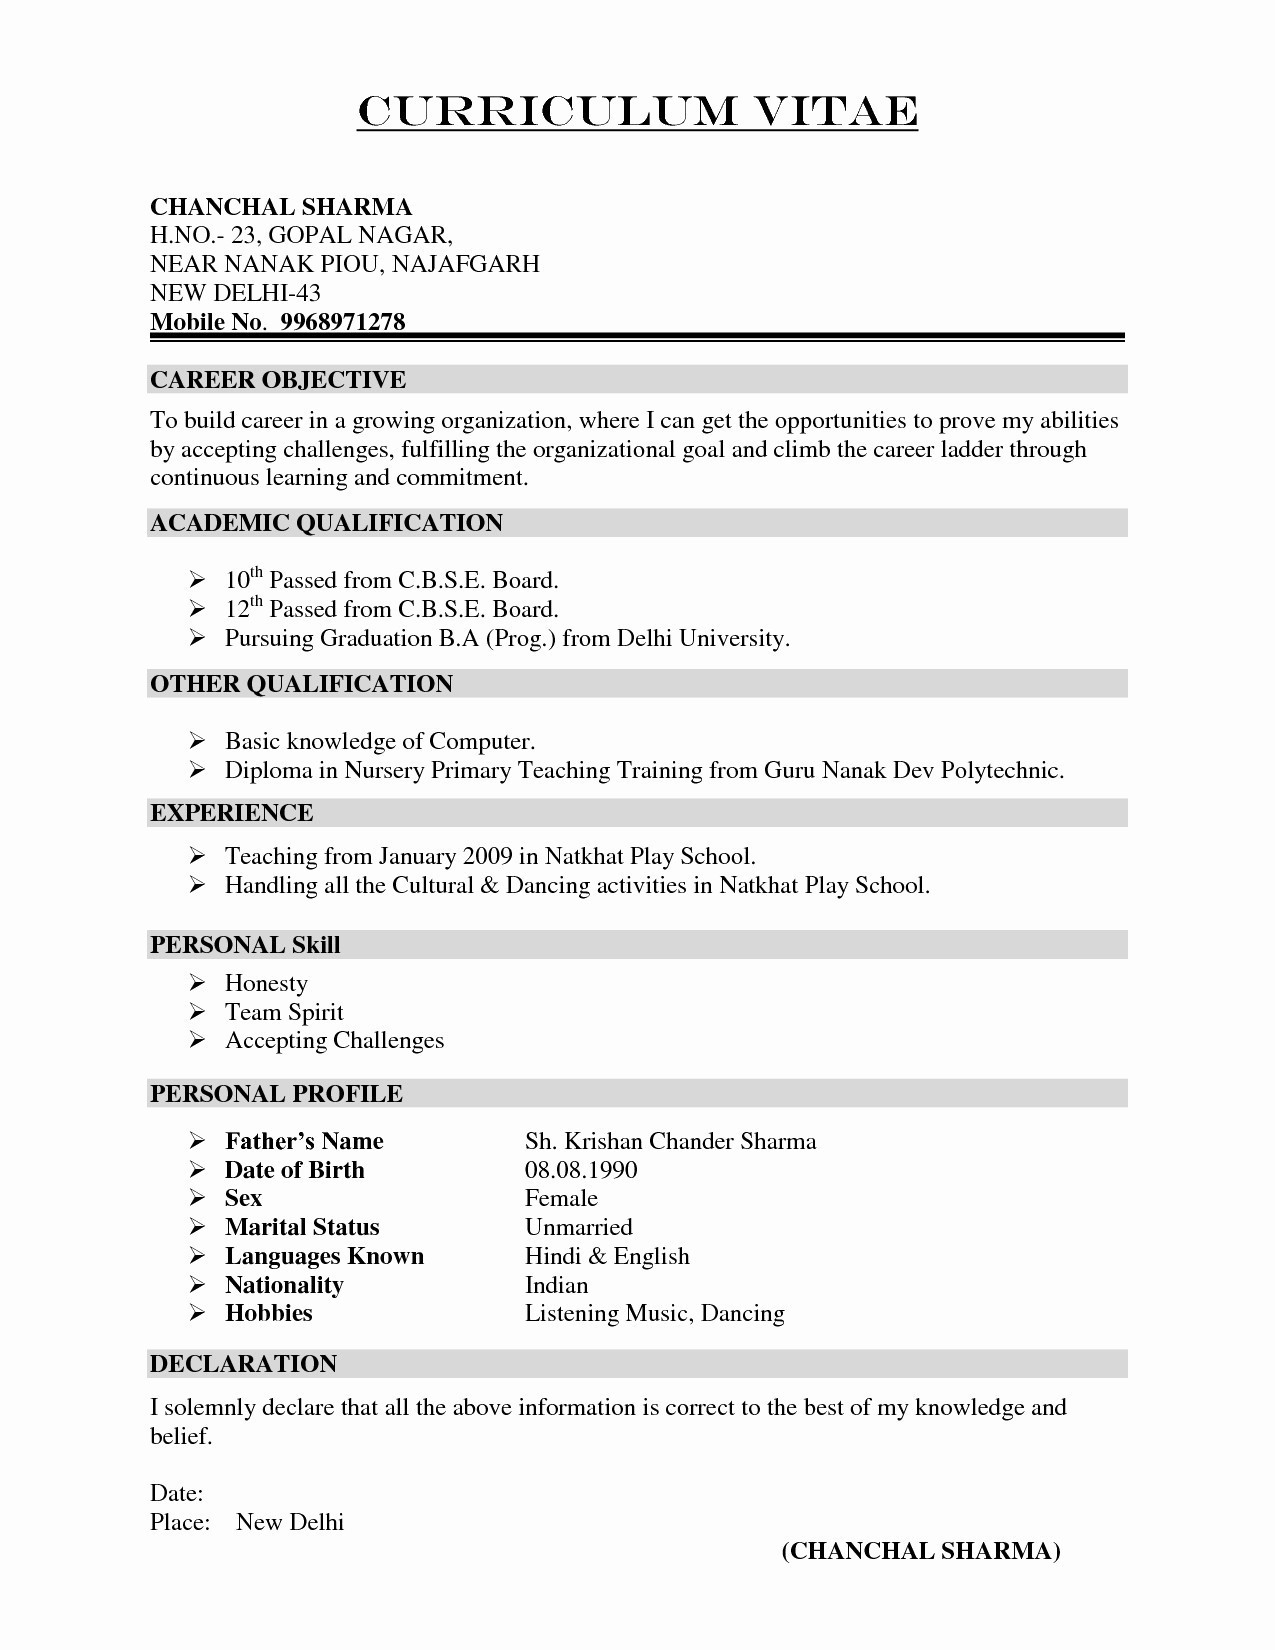 Email Letter Of Recommendation Template - Fresh Resume Cover Letter format